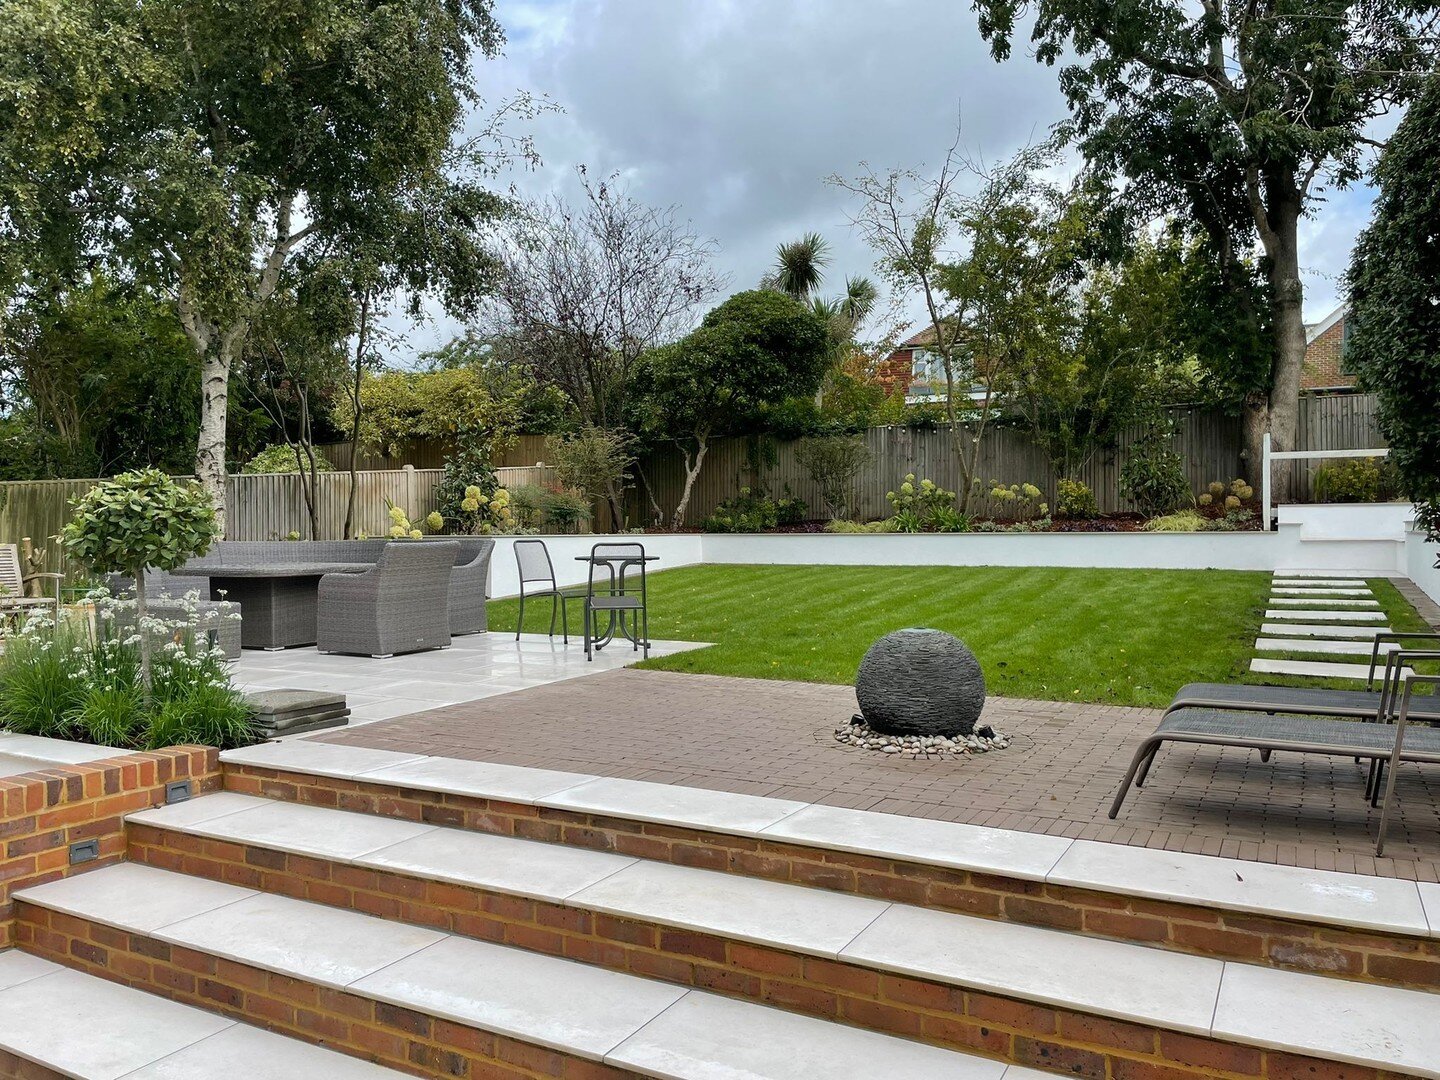 A sneak peek before the professional photos are taken of a lovely little project we have just completed in Hove. More shots to follow! 👀

#landscaping #gardens #gardensofinstagram #JackDunckley #gardendesign #designer #landscapearchitect #garden #in